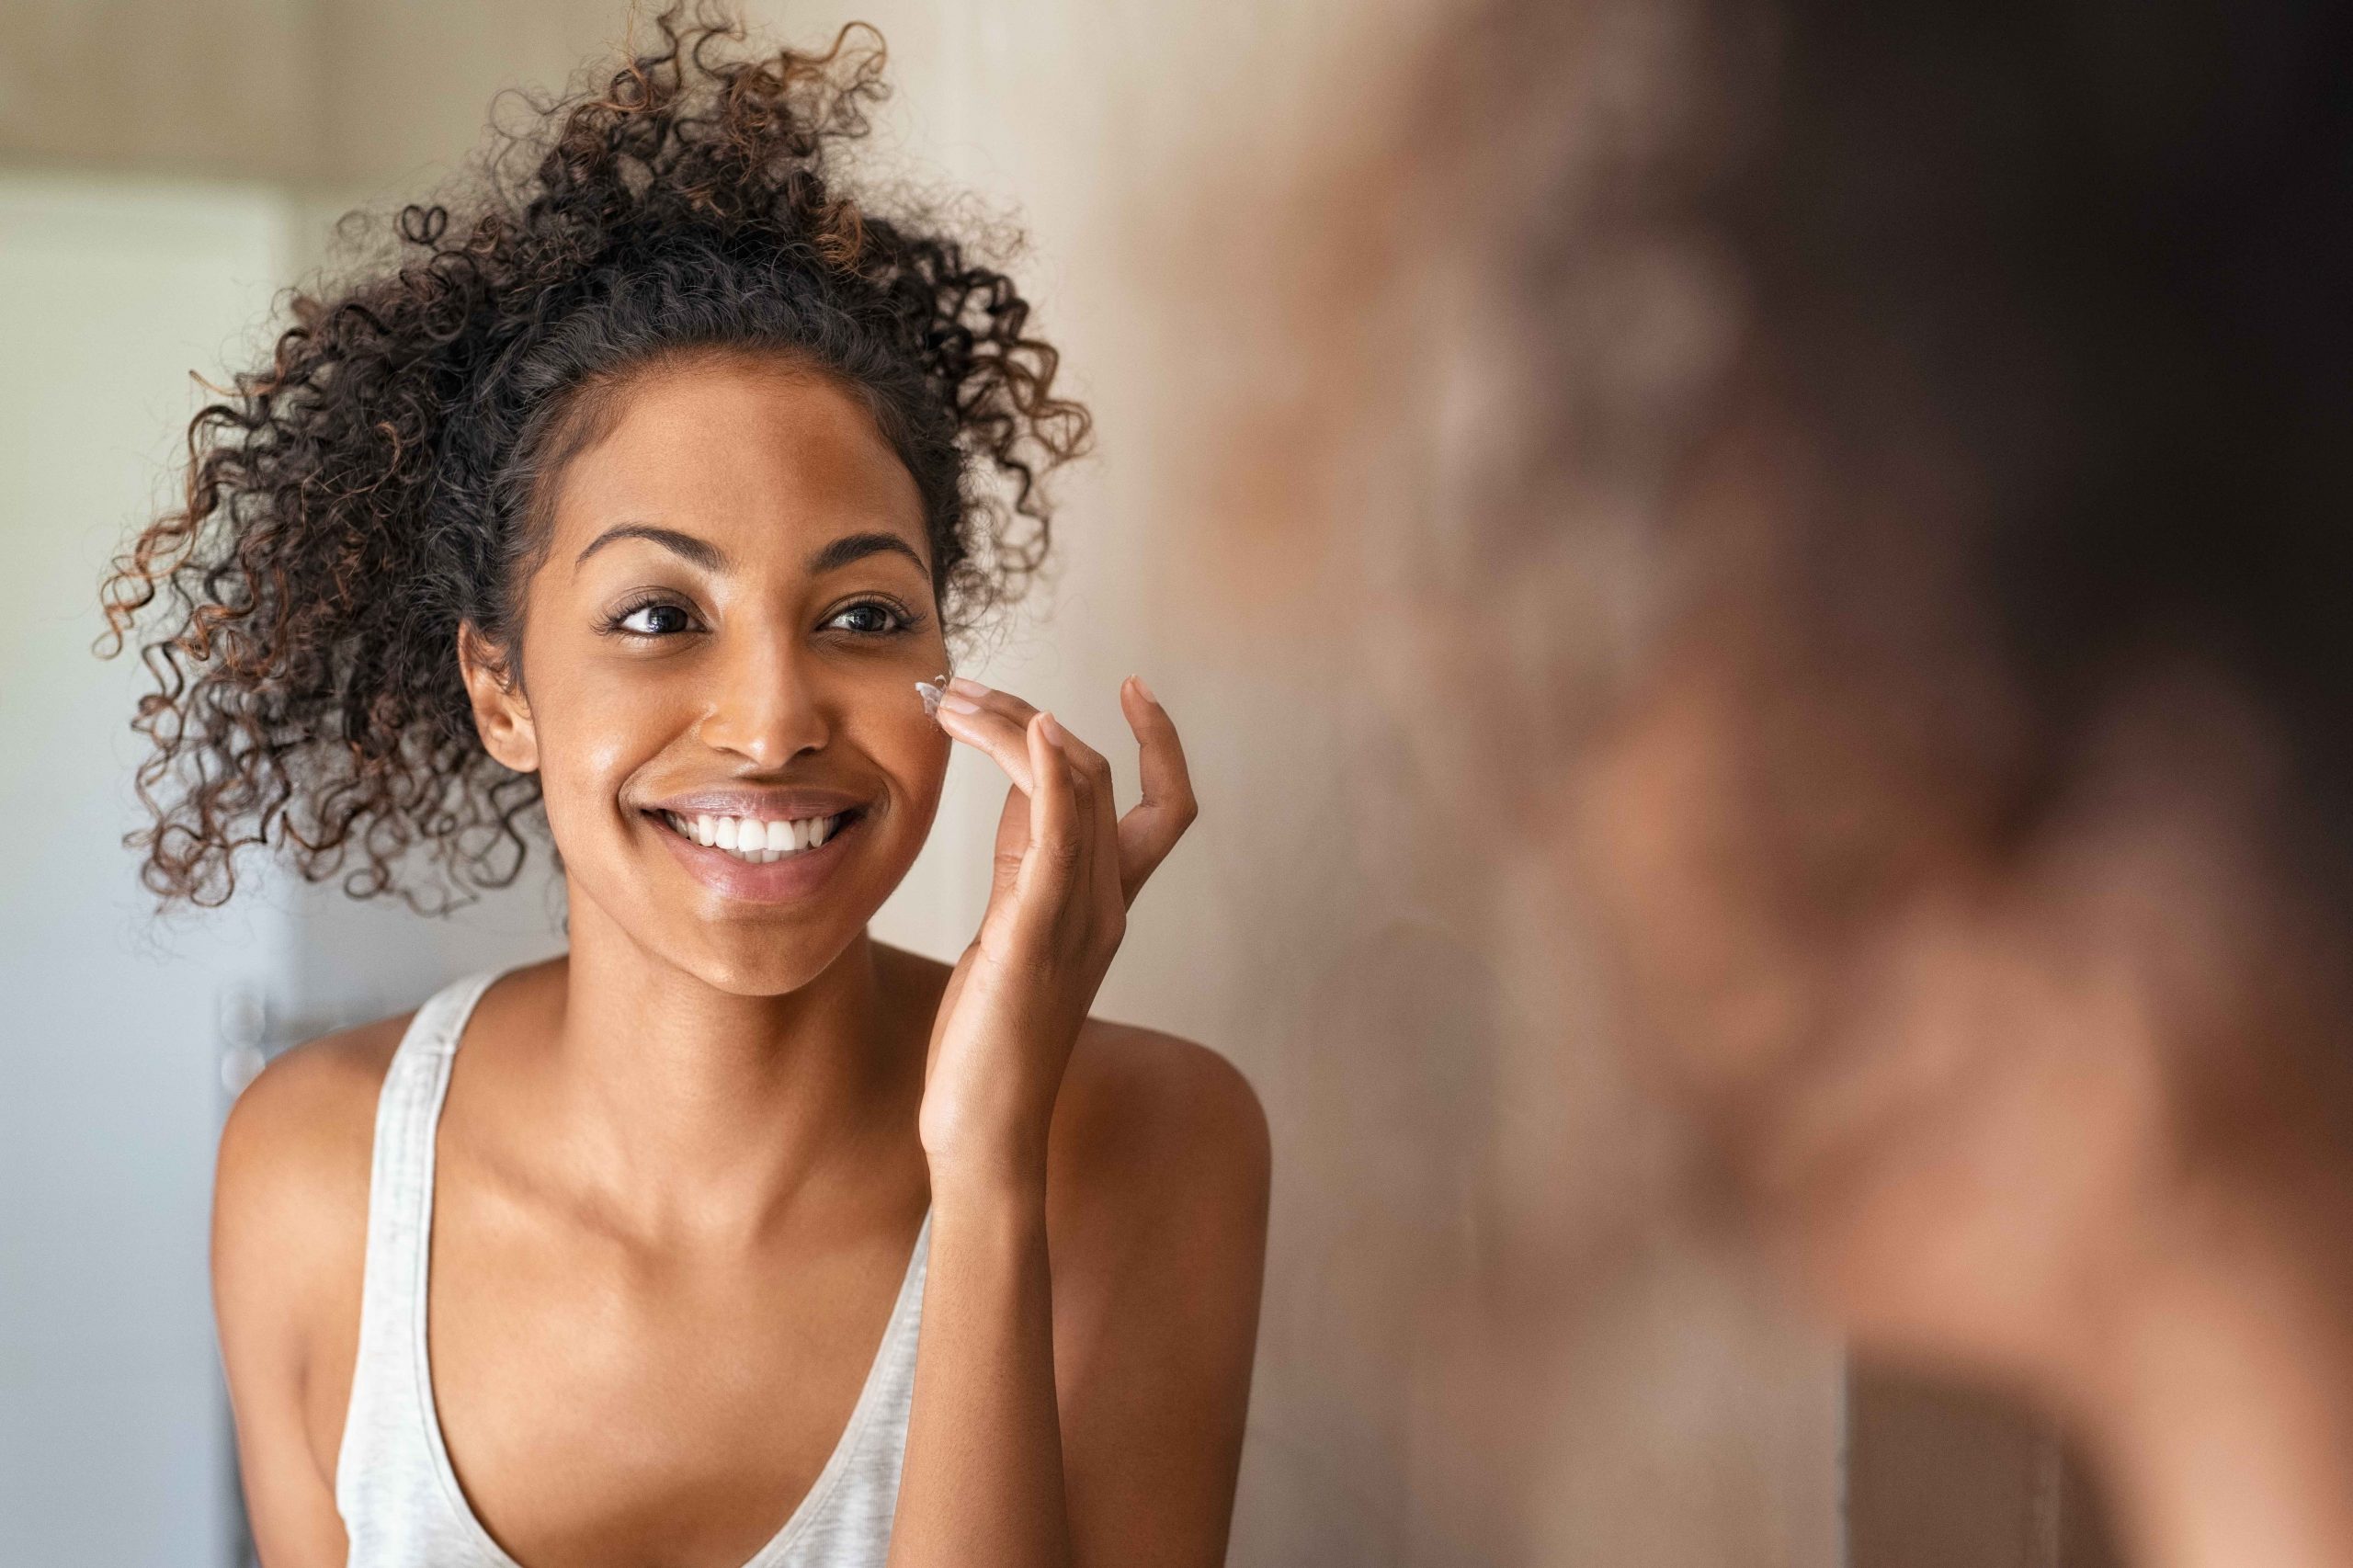 Healthy skin is in — see why 74% say it’s a top priority.